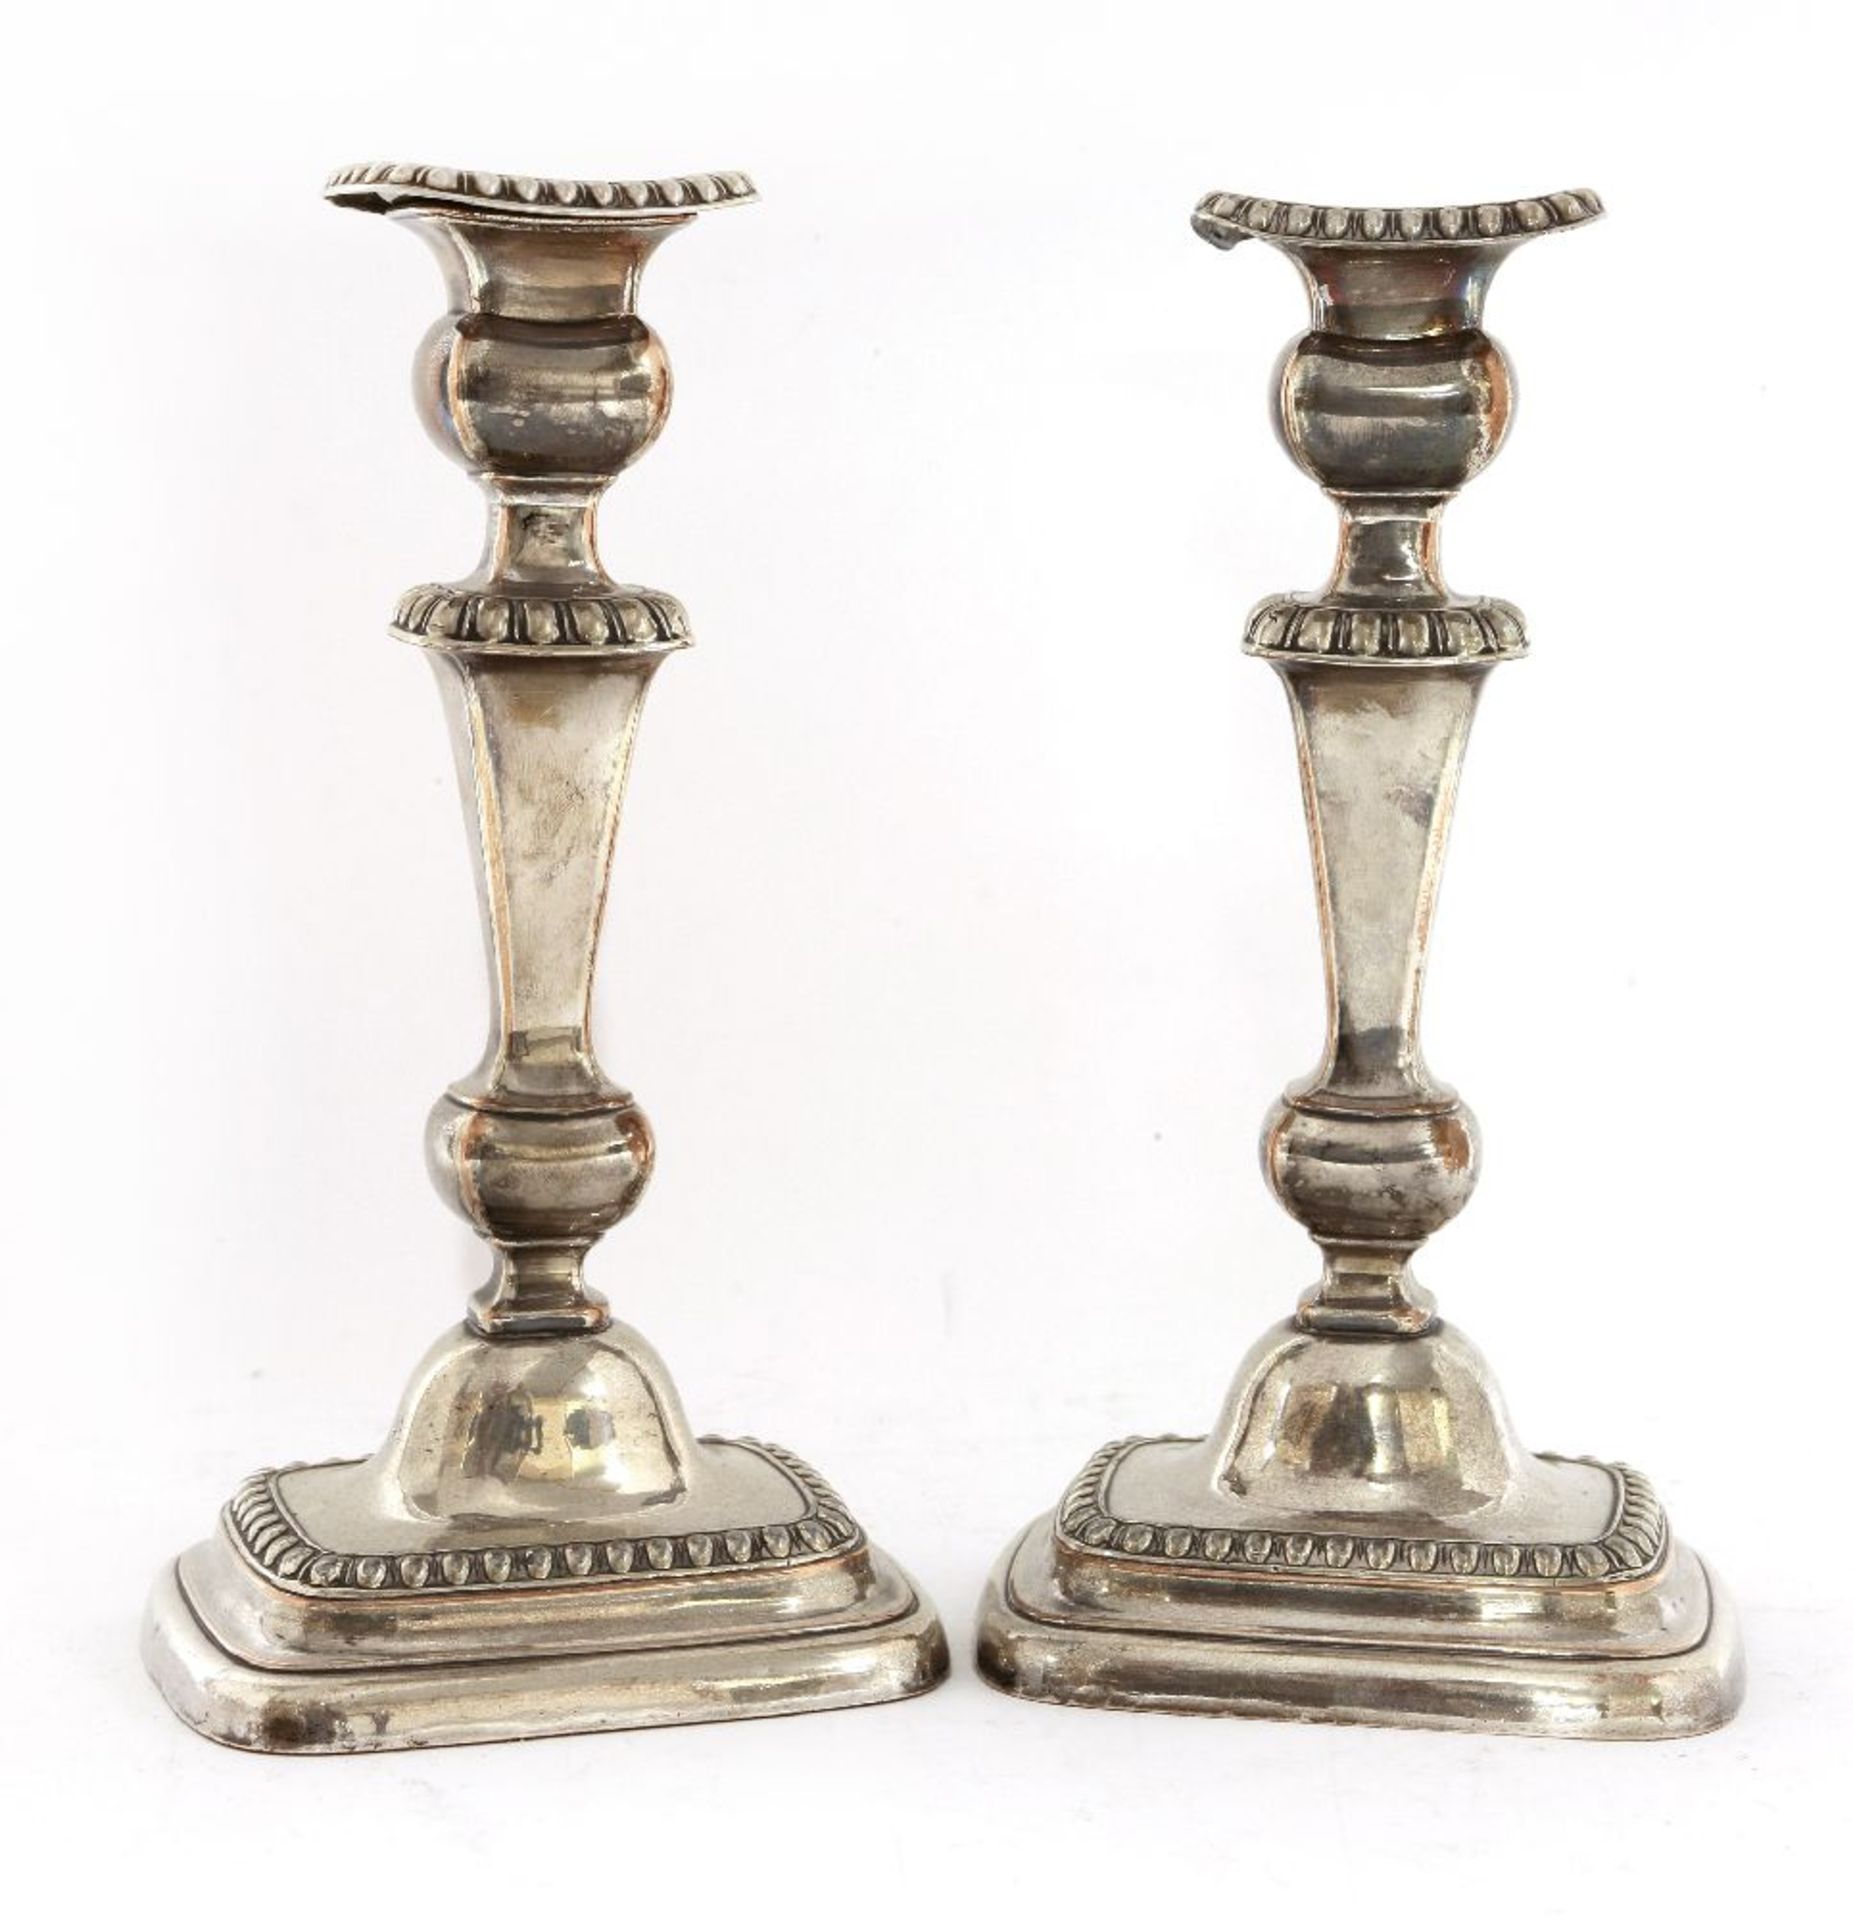 A pair of old Sheffield plate candlesticks,first quarter of the 19th century, of rectangular form